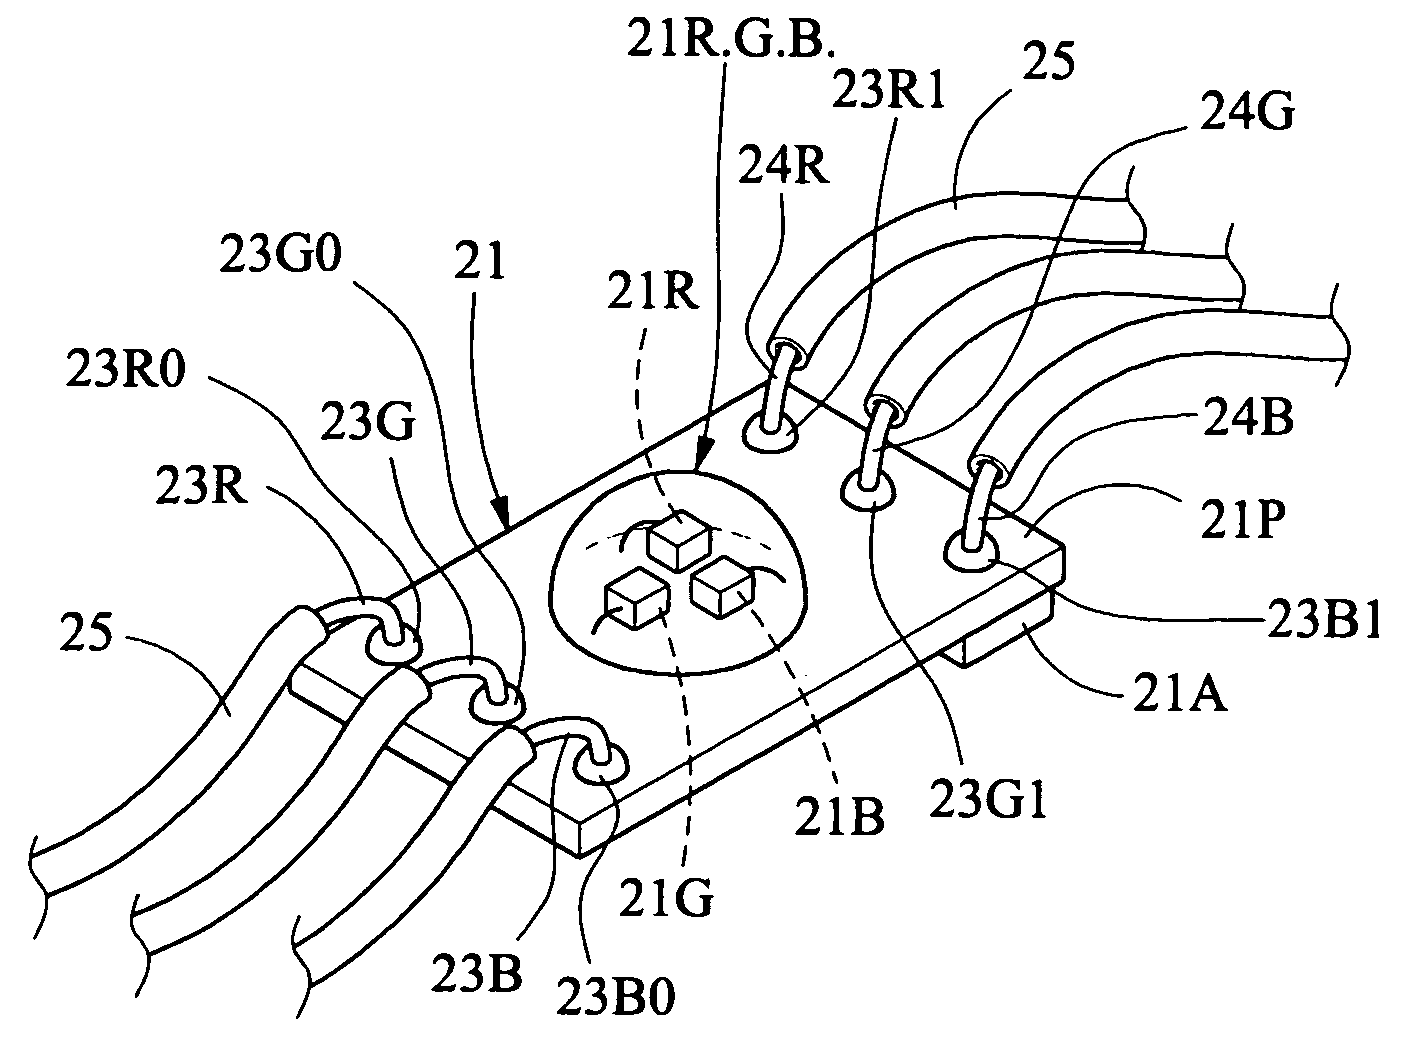 Full-color flexible light source device